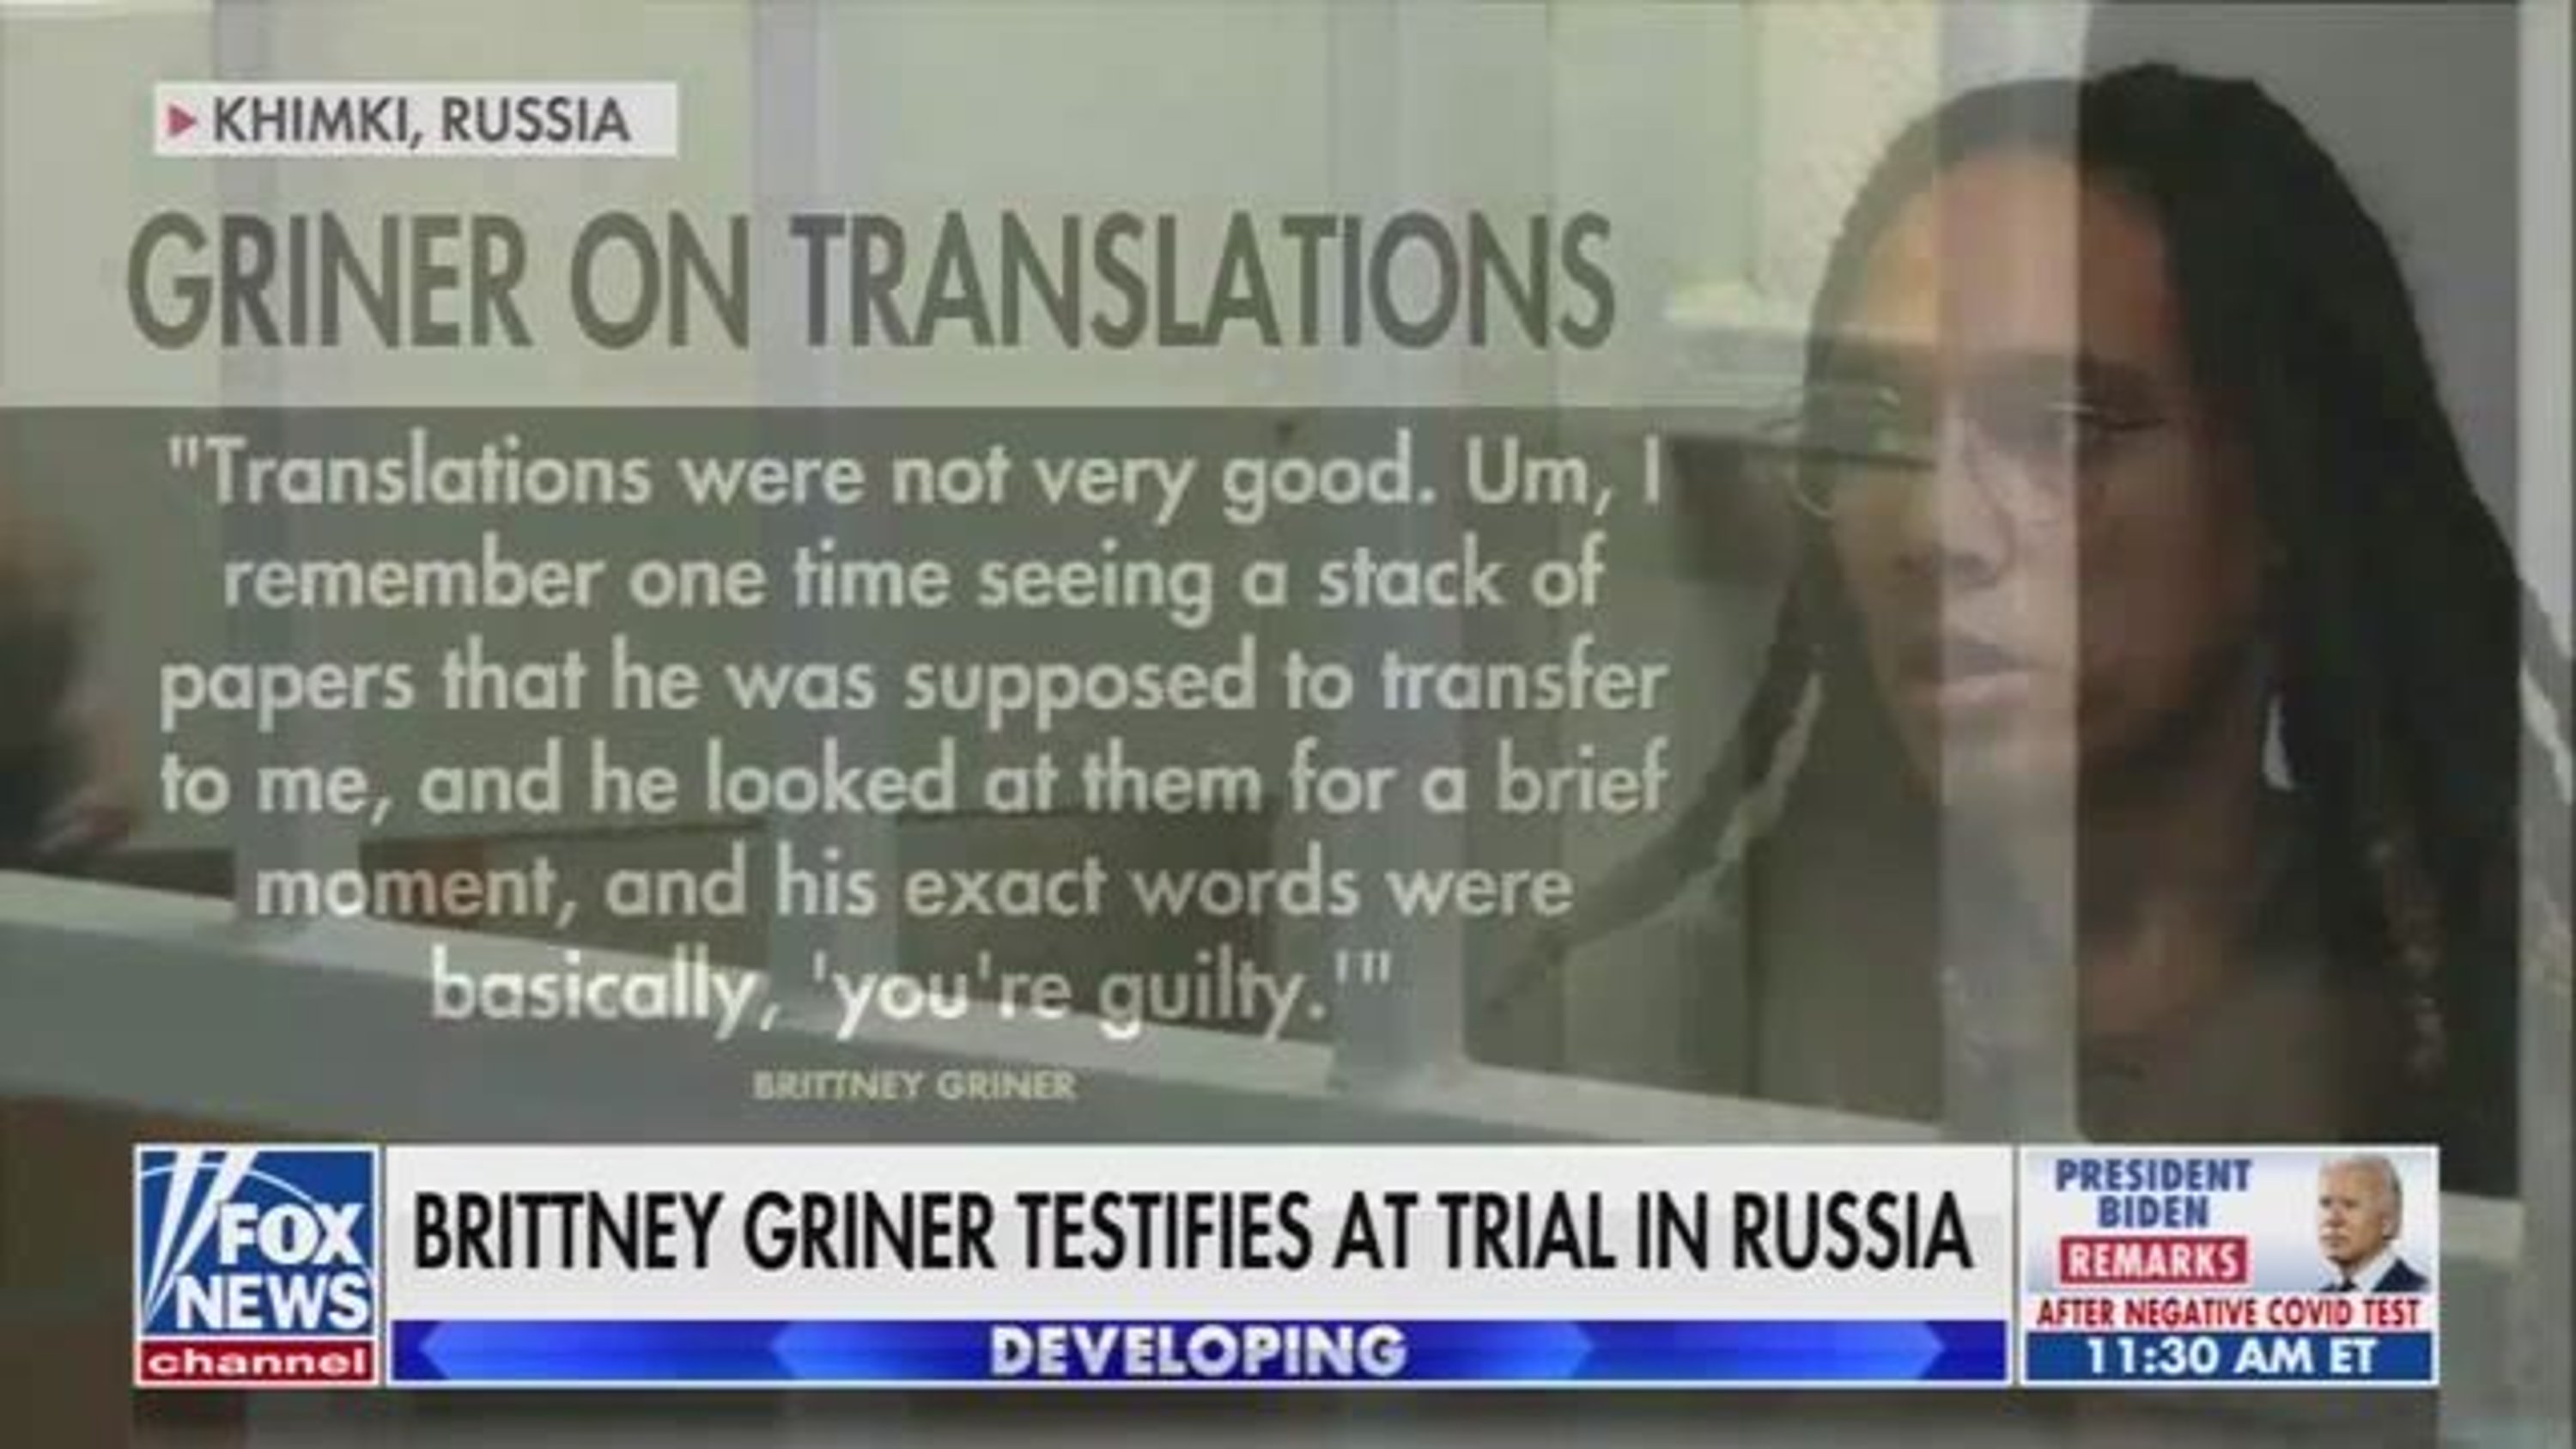 Brittney Griner Takes The Stand Today While The U.S. Is Offering A Prisner Swap [VIDEO]